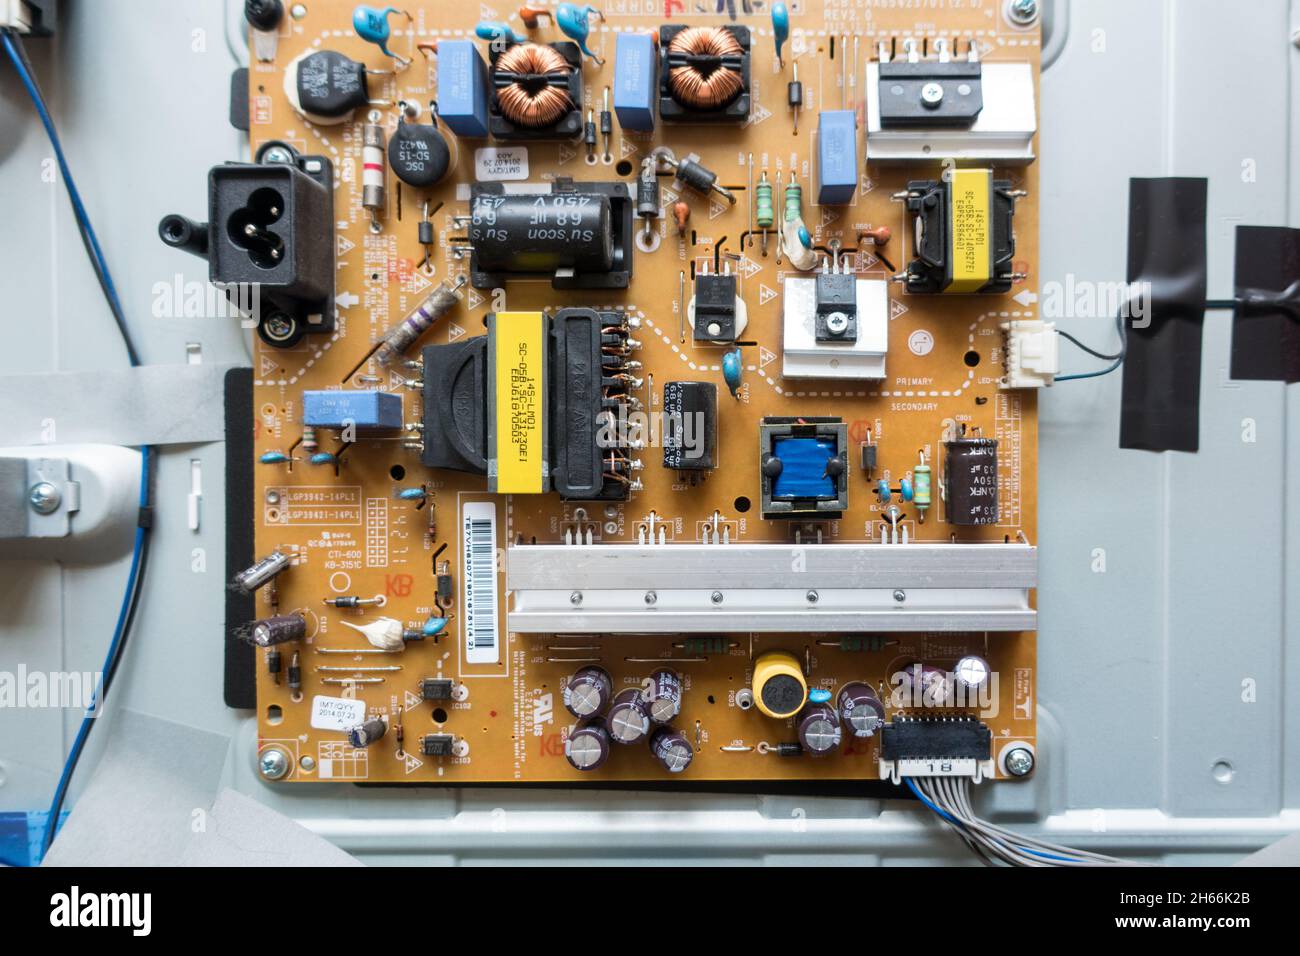 Exposed Electronic control unit and connection ports of a LCD television Stock Photo